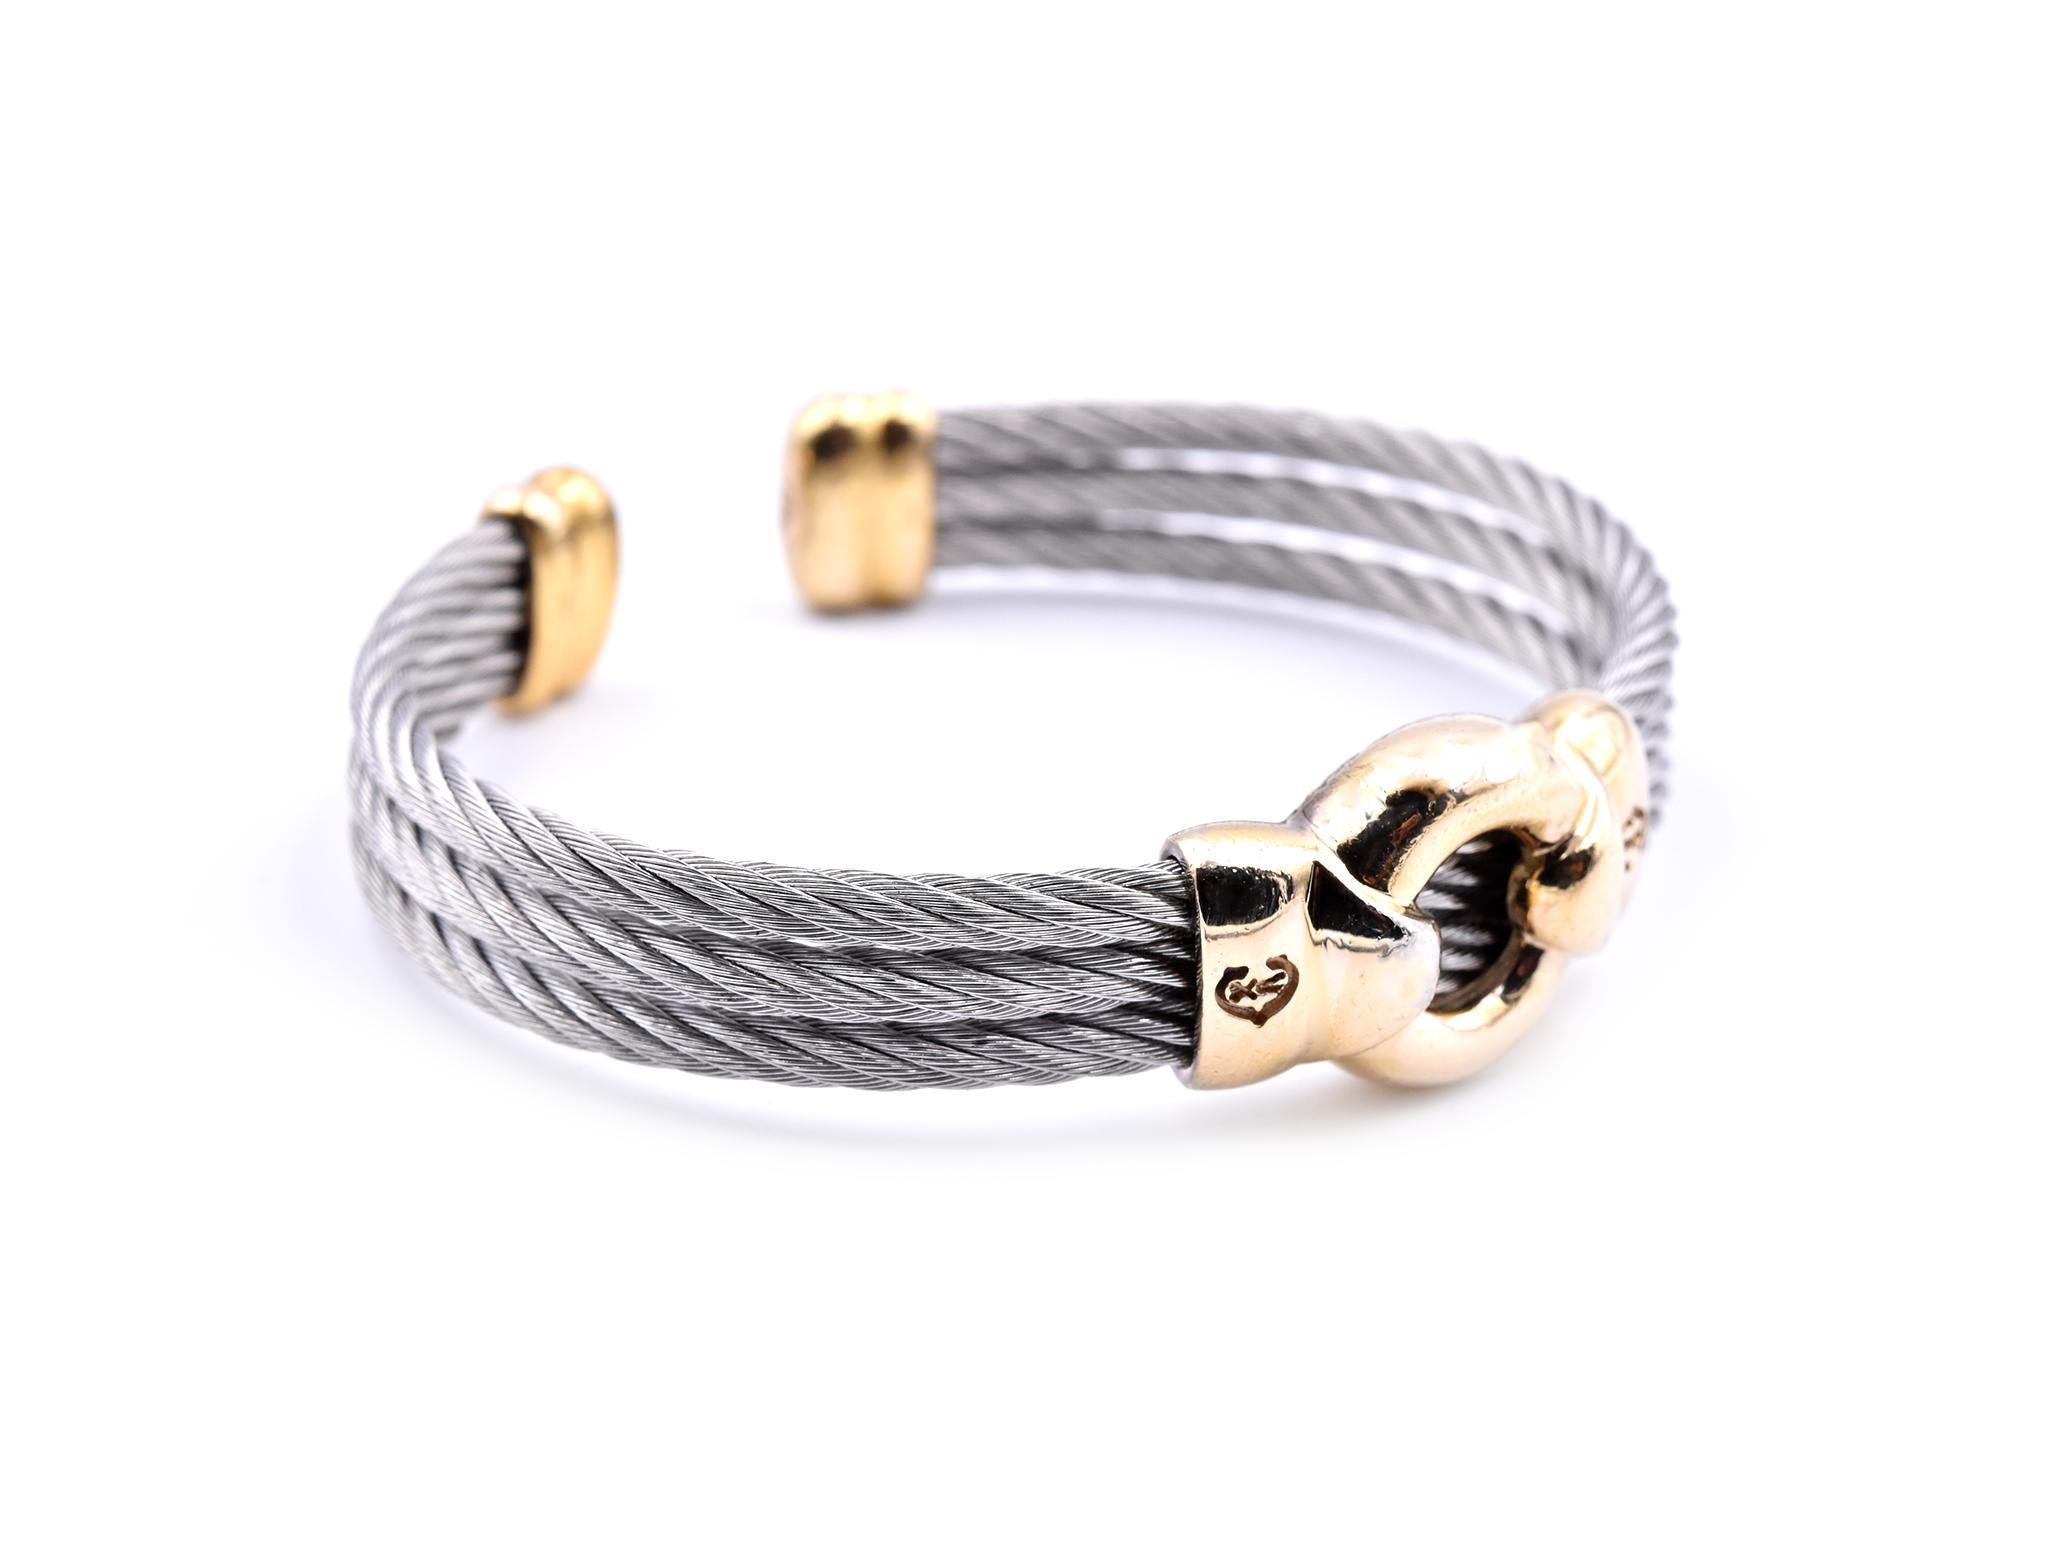 Designer: custom design
Material: 14k yellow gold and stainless steel
Dimensions: cuff bracelet will fit a 6 ½-inch wrist and it is 9.45mm-16.20mm wide
Weight: 31.8 grams
